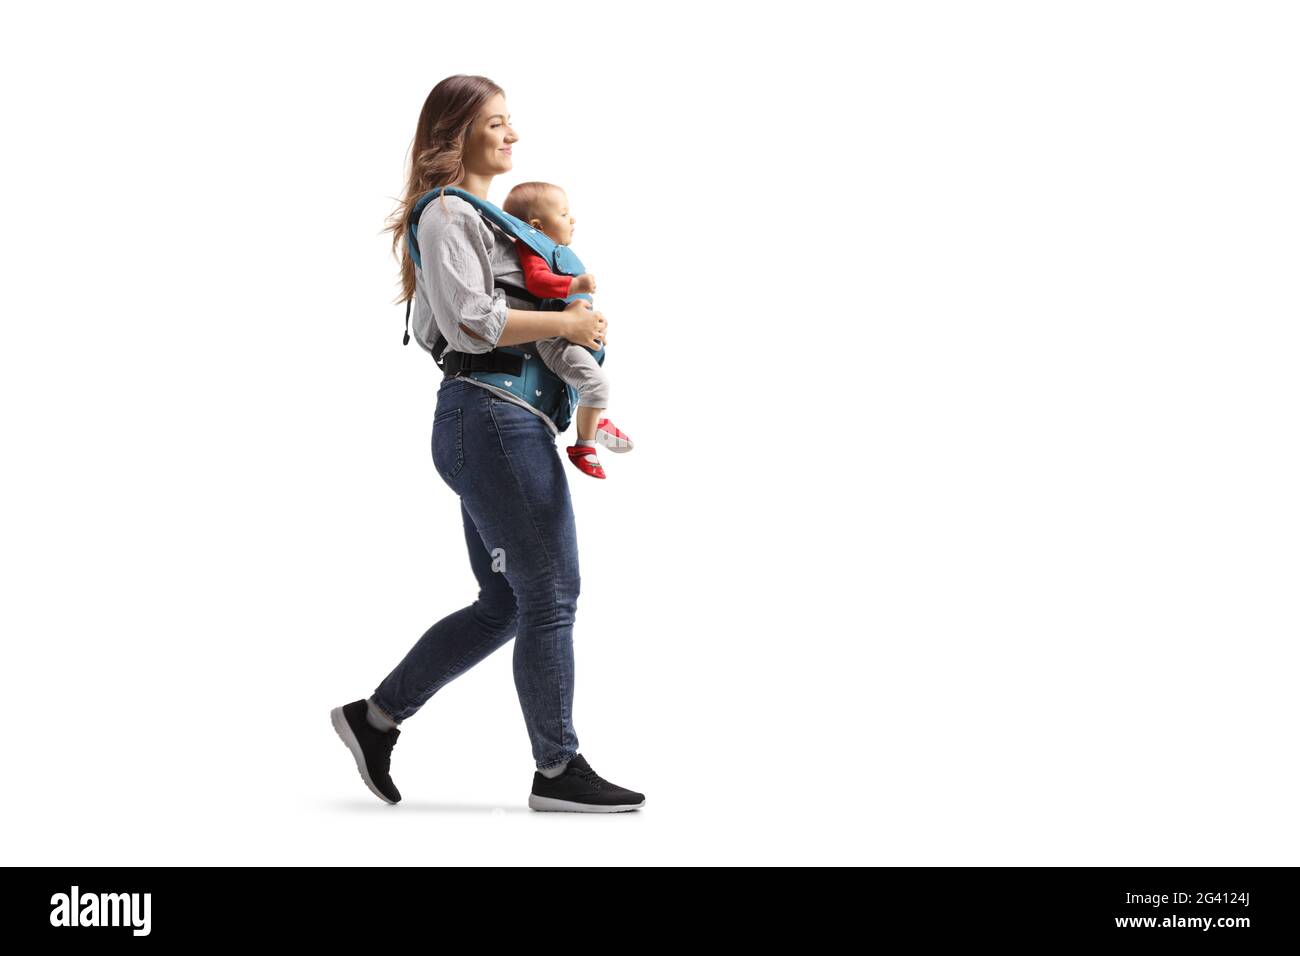 Full length profile shot of a mother walking and carrying a baby in a carrier solated on white background Stock Photo